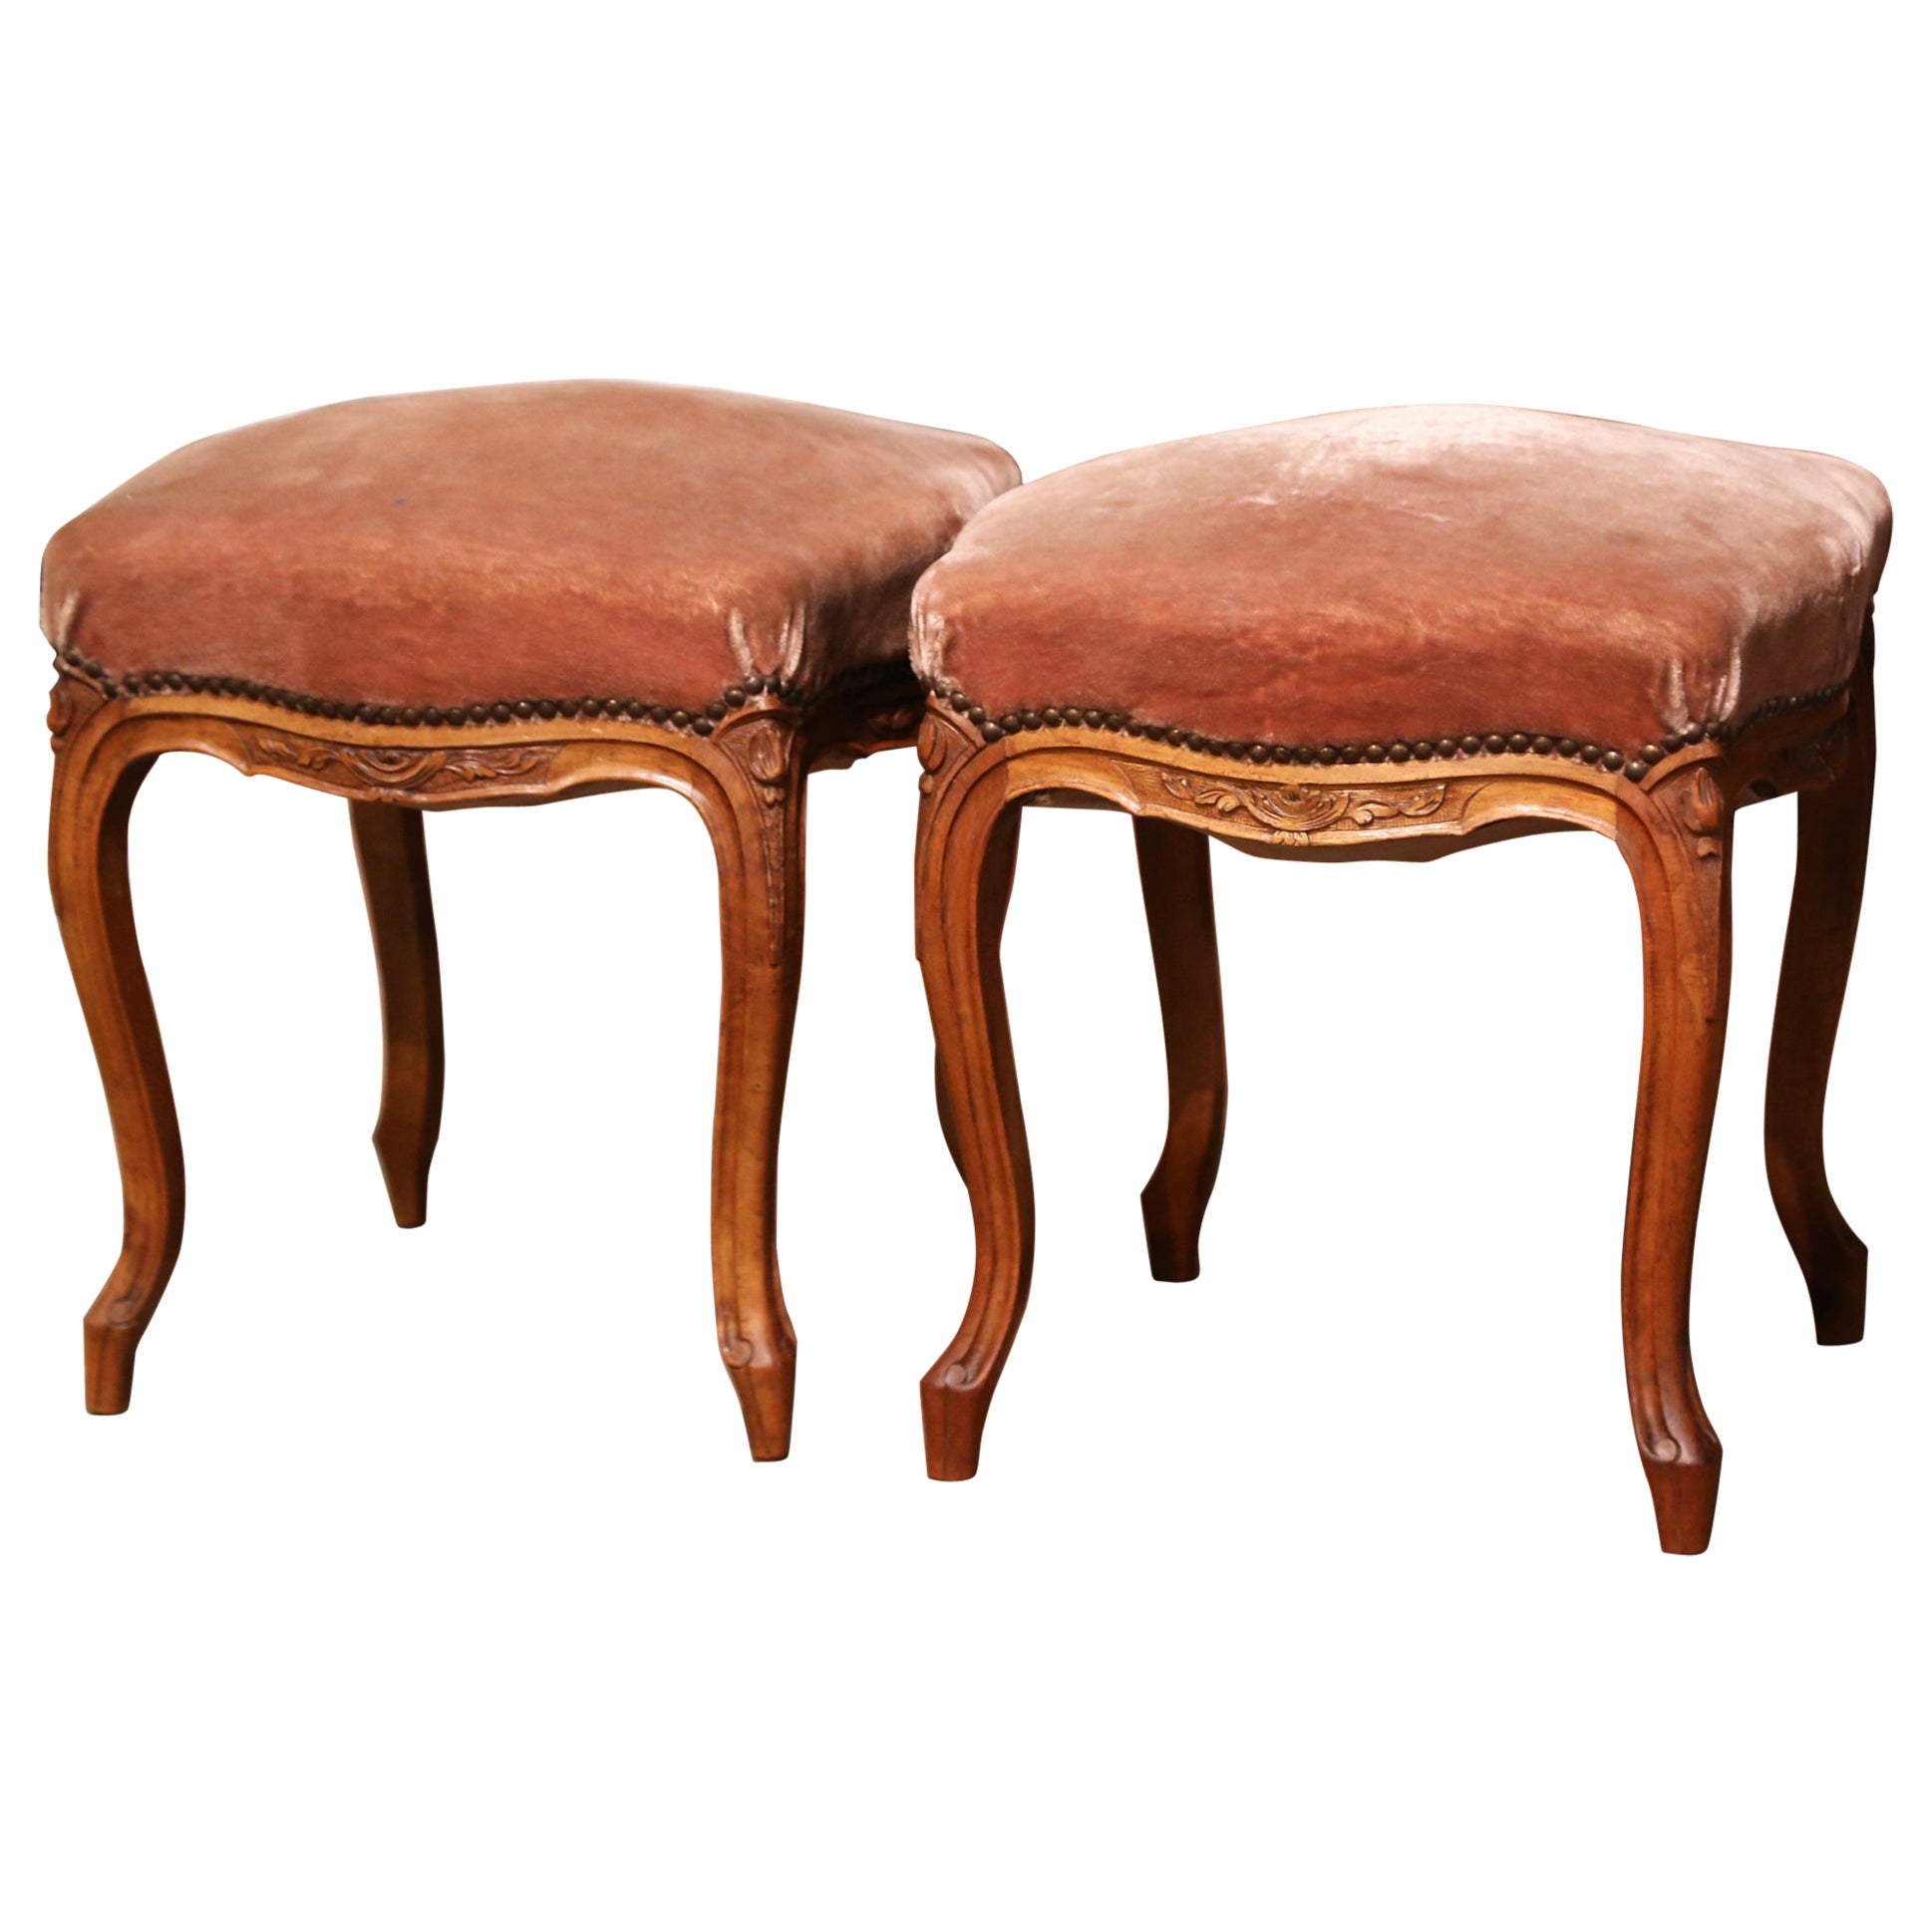 Pair of Early 20th Century French Louis XV Carved Walnut and Velvet Stools